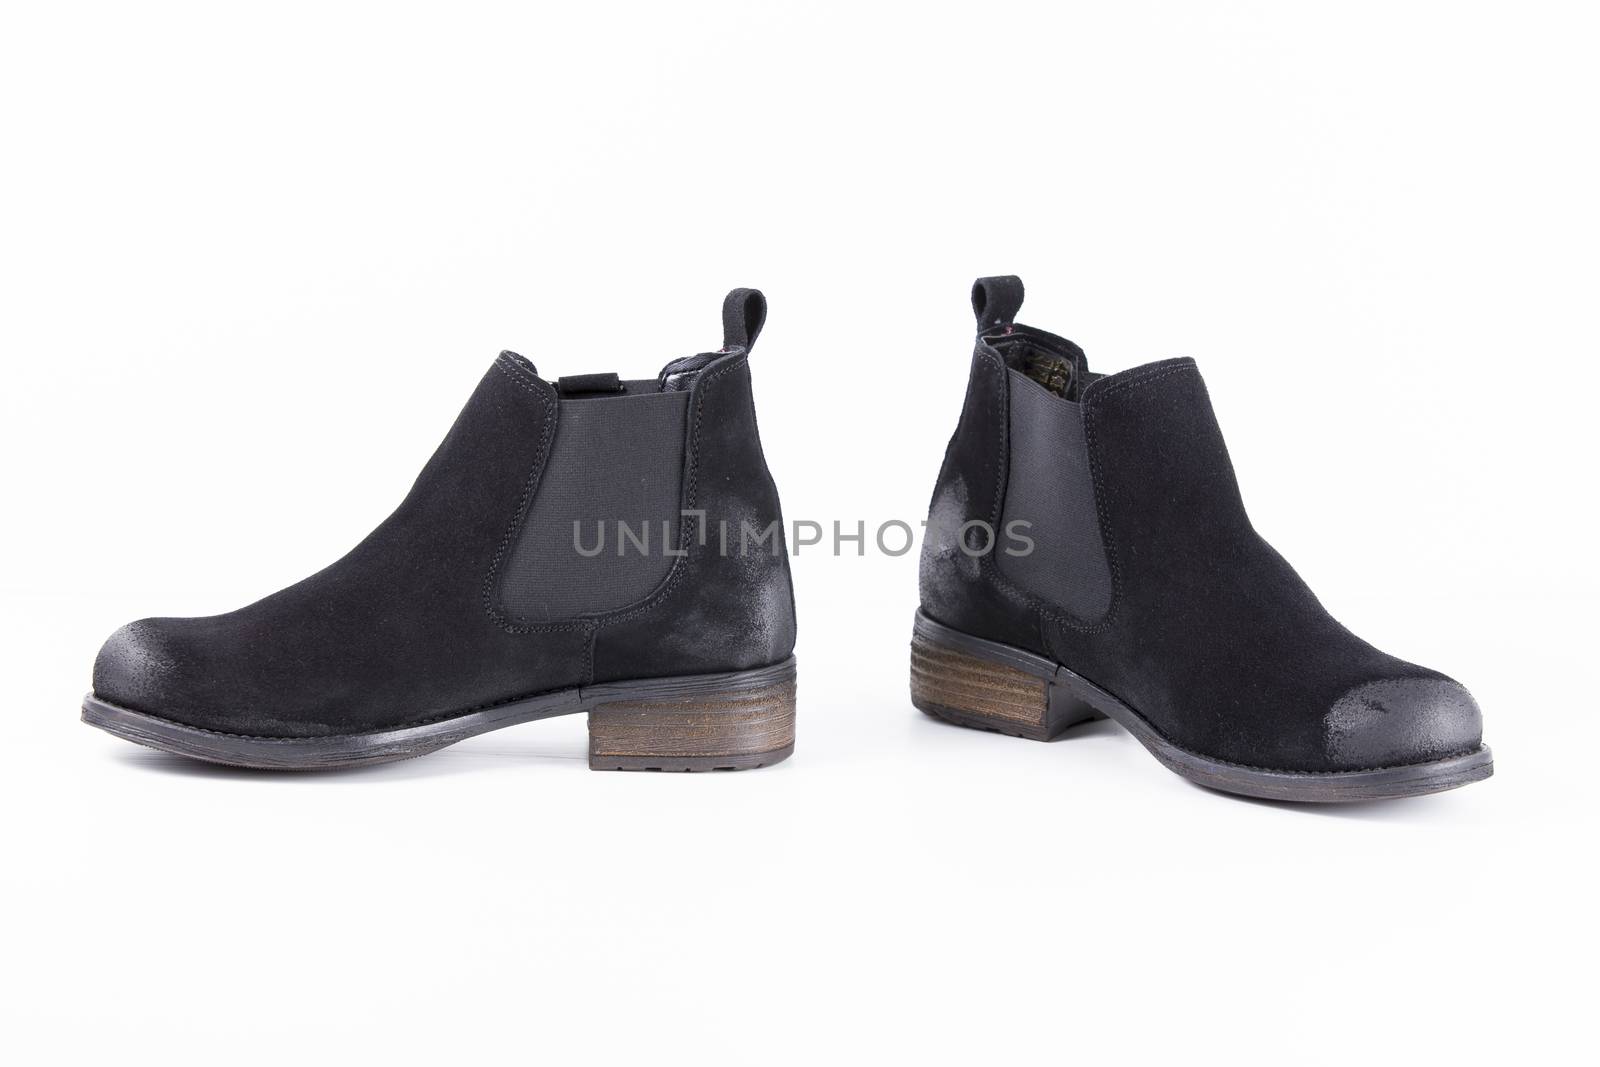 Pair of black leather boots on white background, isolated product.